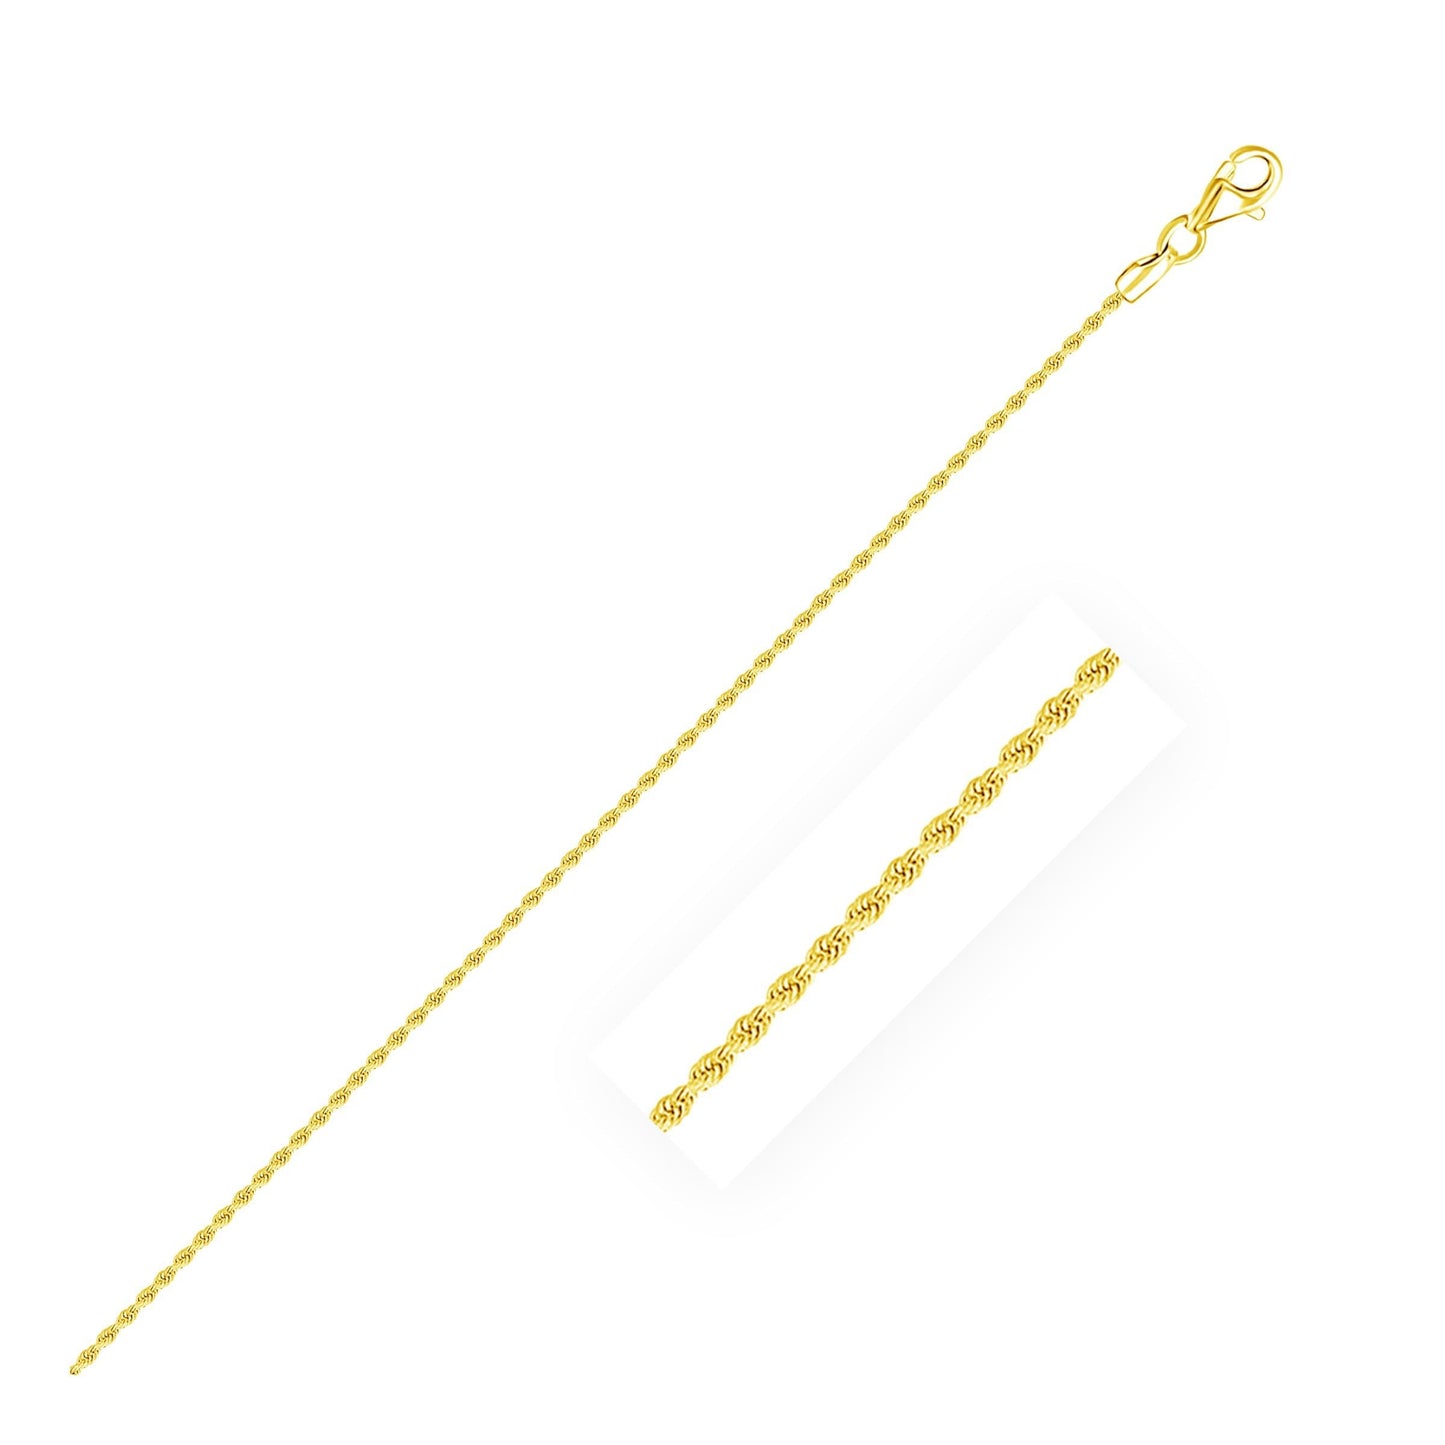 Polished 14k Yellow Gold Anklet